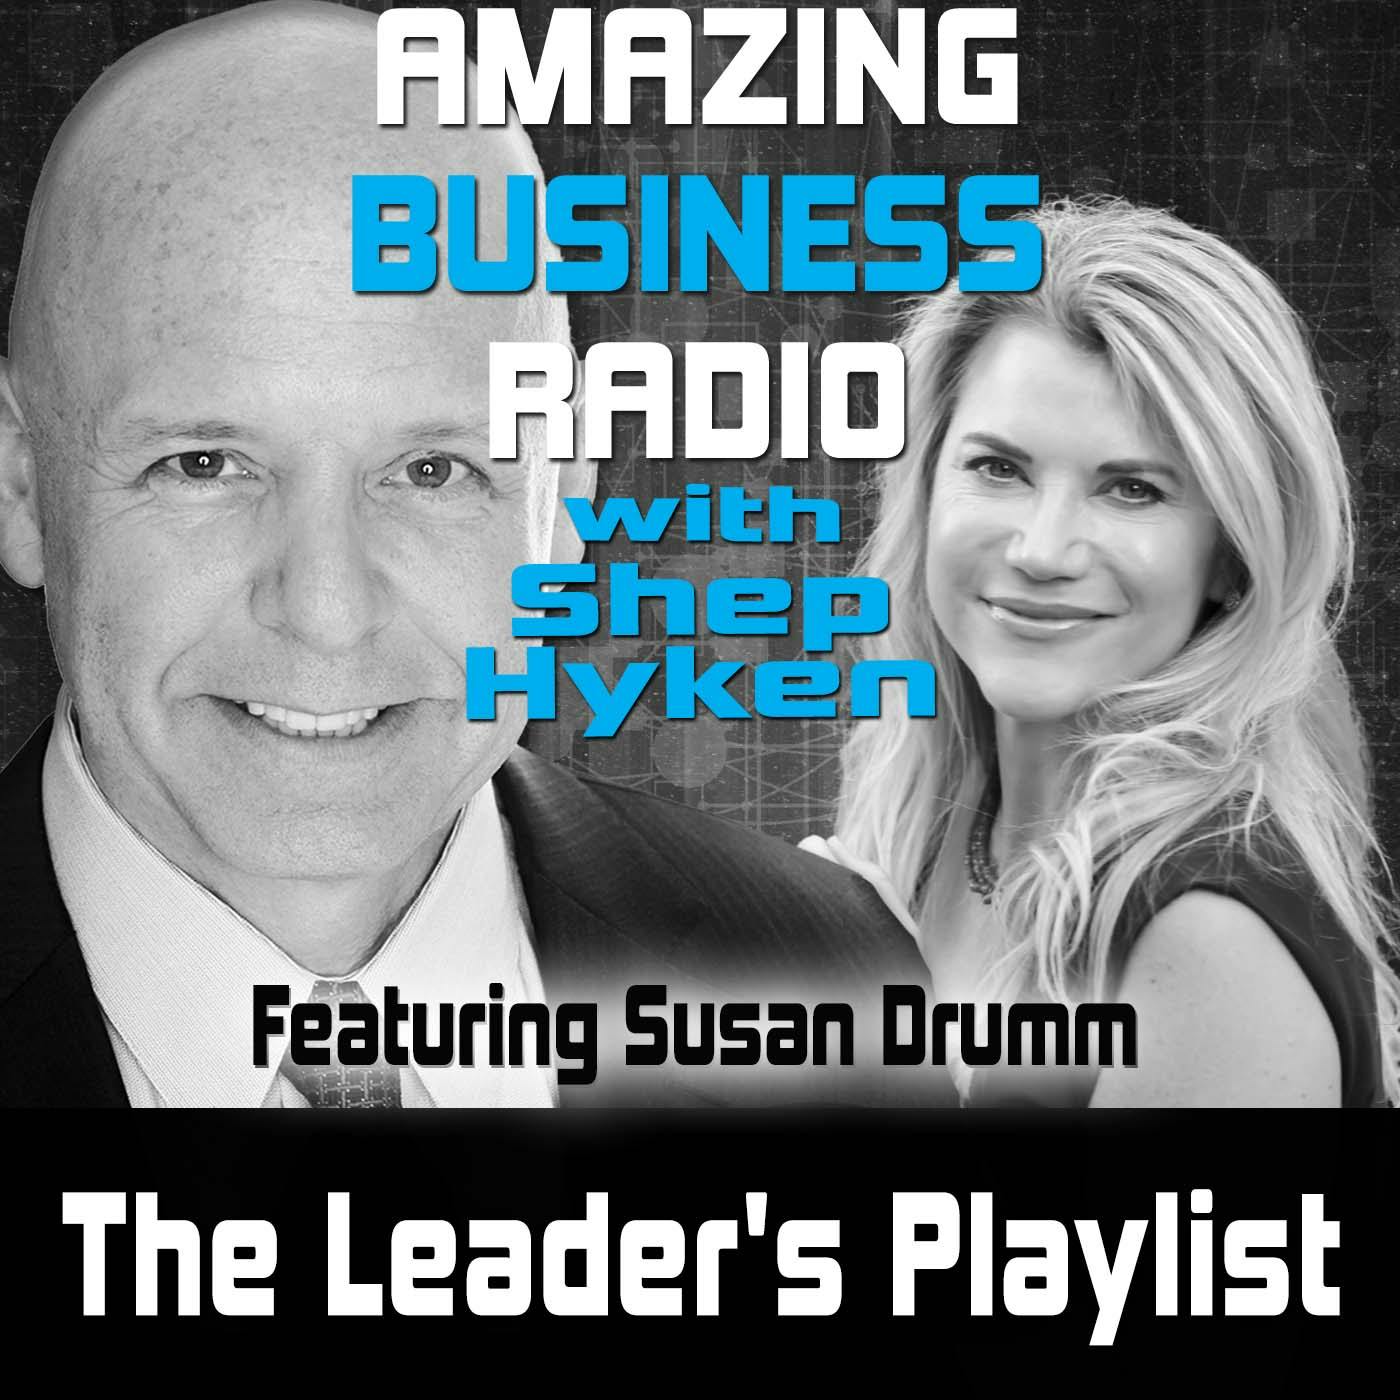 The Leader's Playlist Featuring Susan Drumm